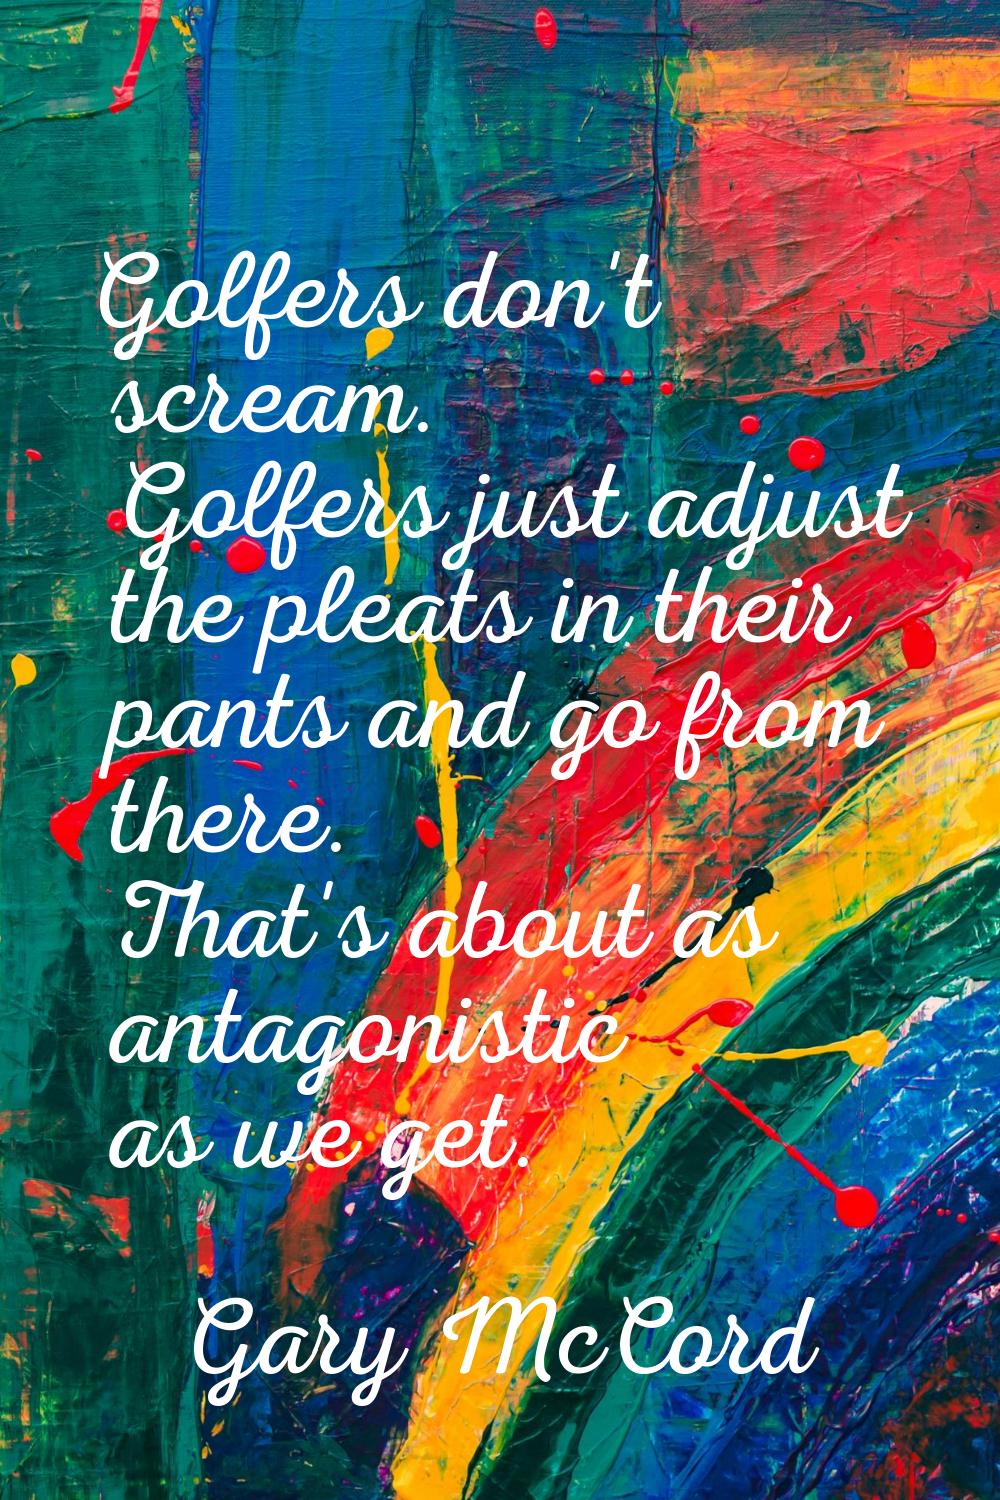 Golfers don't scream. Golfers just adjust the pleats in their pants and go from there. That's about